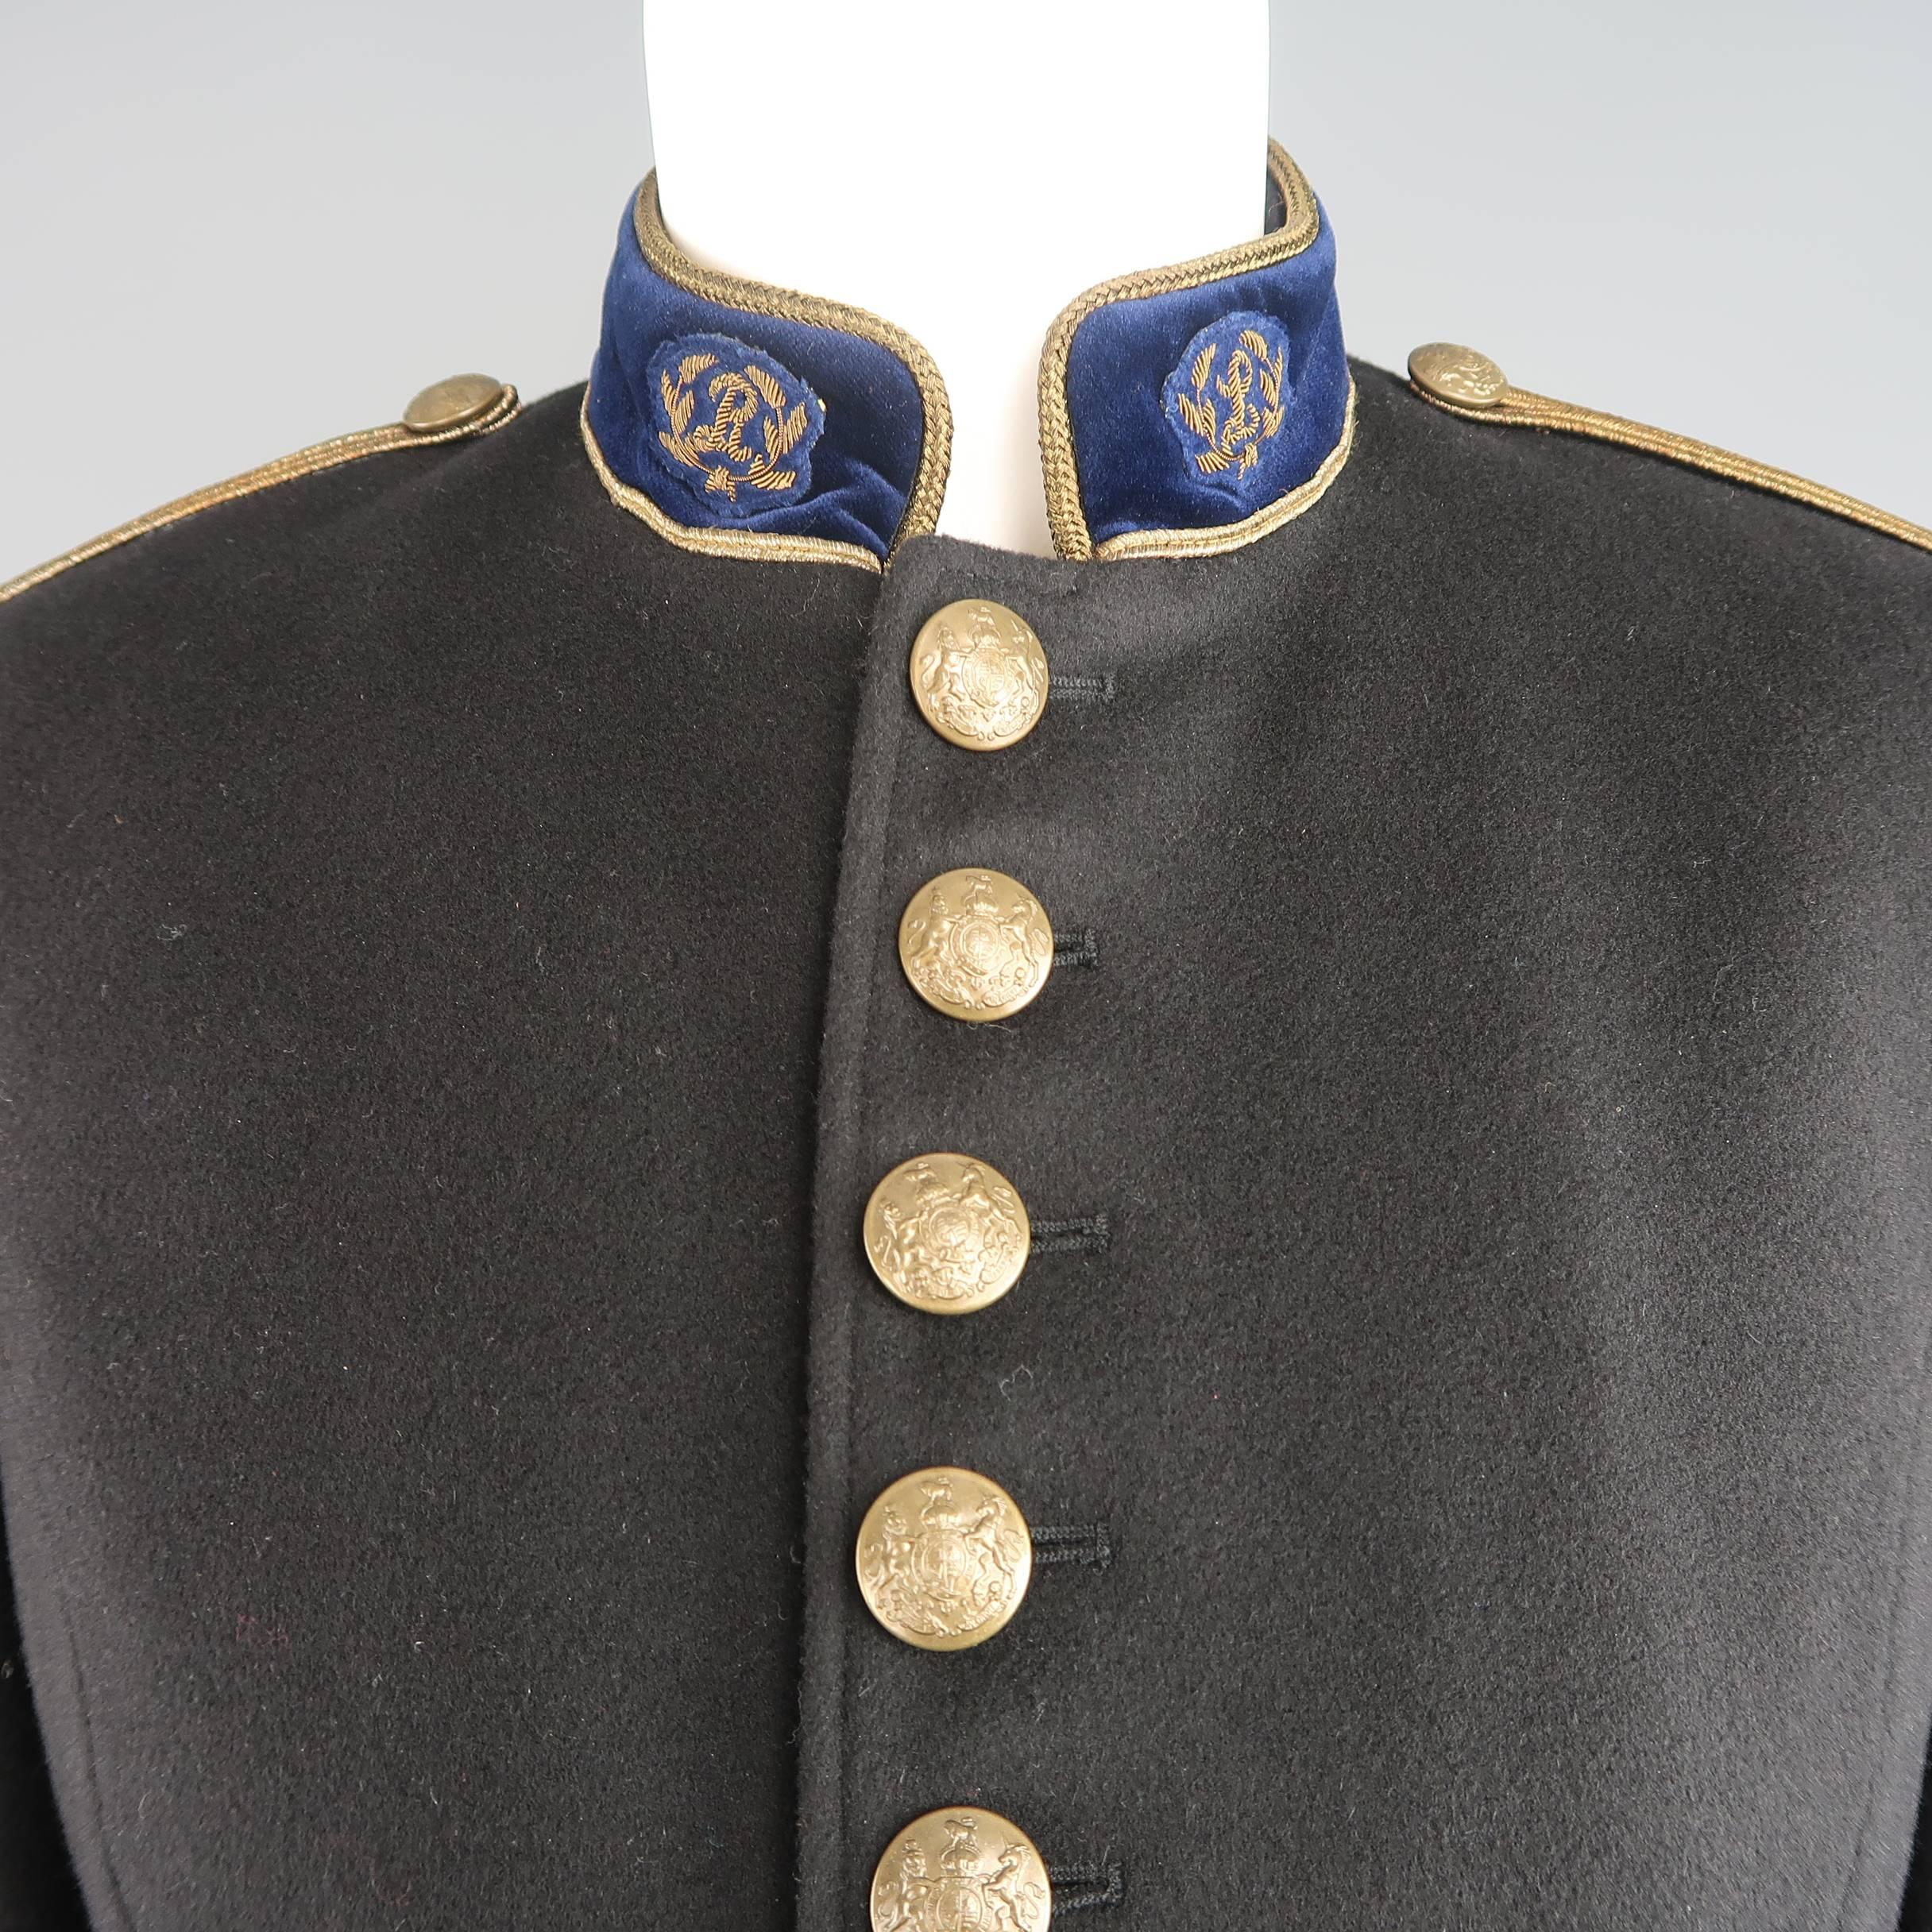 This gorgeous RRL by RALPH LAUREN cropped military band jacket comes in a cashmere blend felt and features a navy blue velvet band collar with embroidered logo emblems, dark gold tone coat or arms antique buttons, embroidered epaulets, faux button